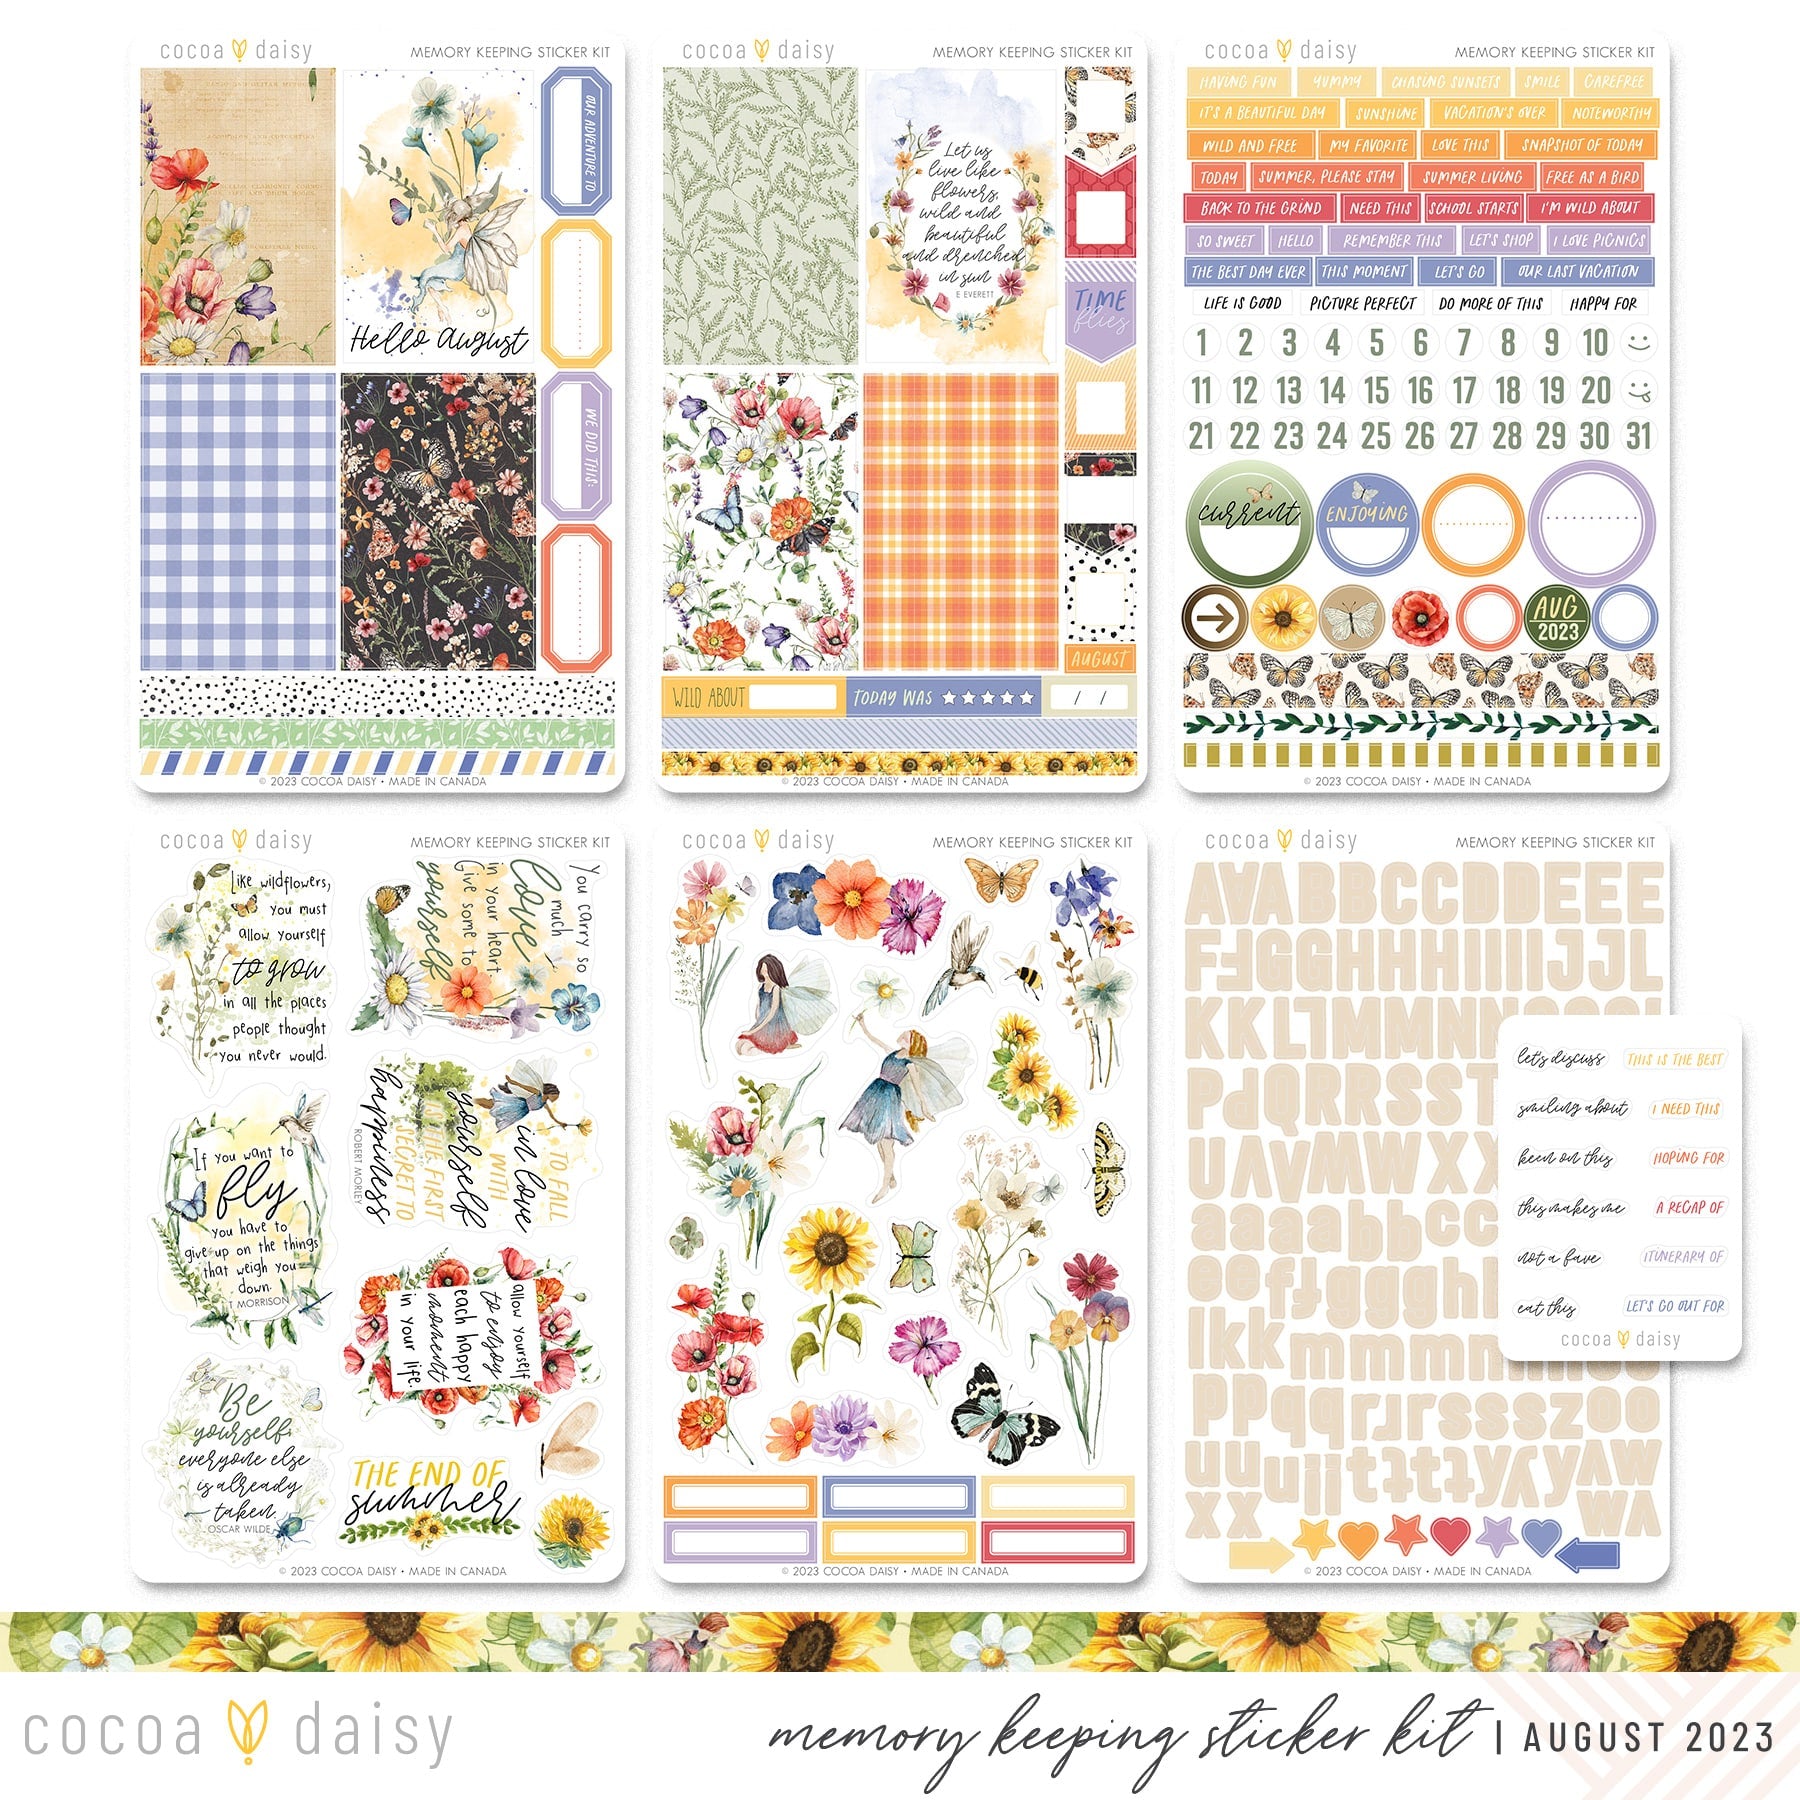 Daily Journal Scrapbooking Kit September 2023 – Cocoa Daisy